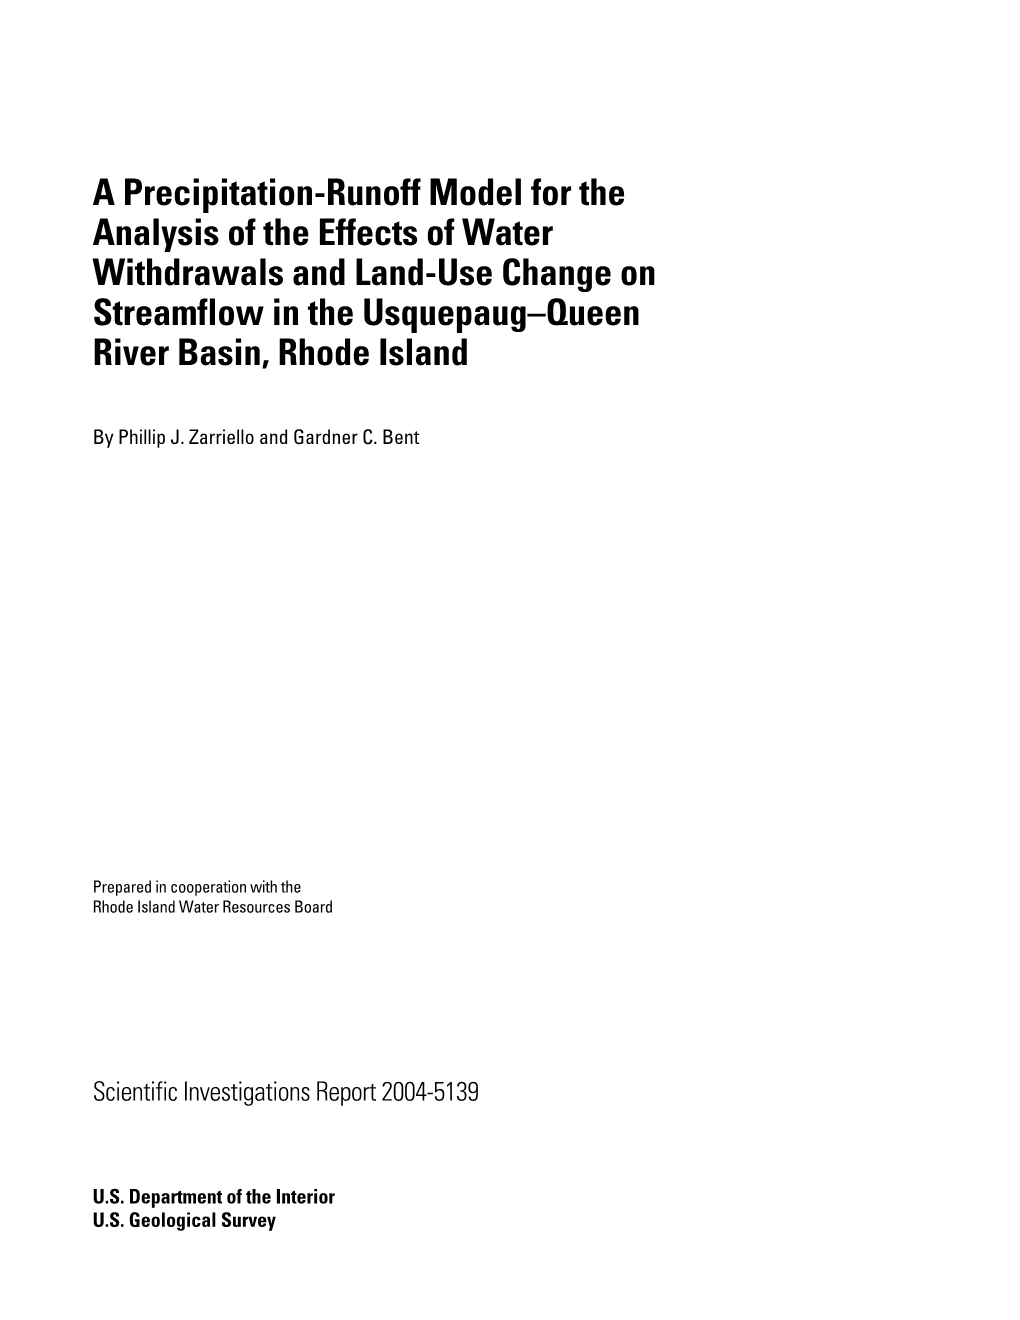 A Precipitation-Runoff Model for the Analysis of the Effects of Water Withdrawals and Land-Use Change on Streamflow in the Usquepaug–Queen River Basin, Rhode Island